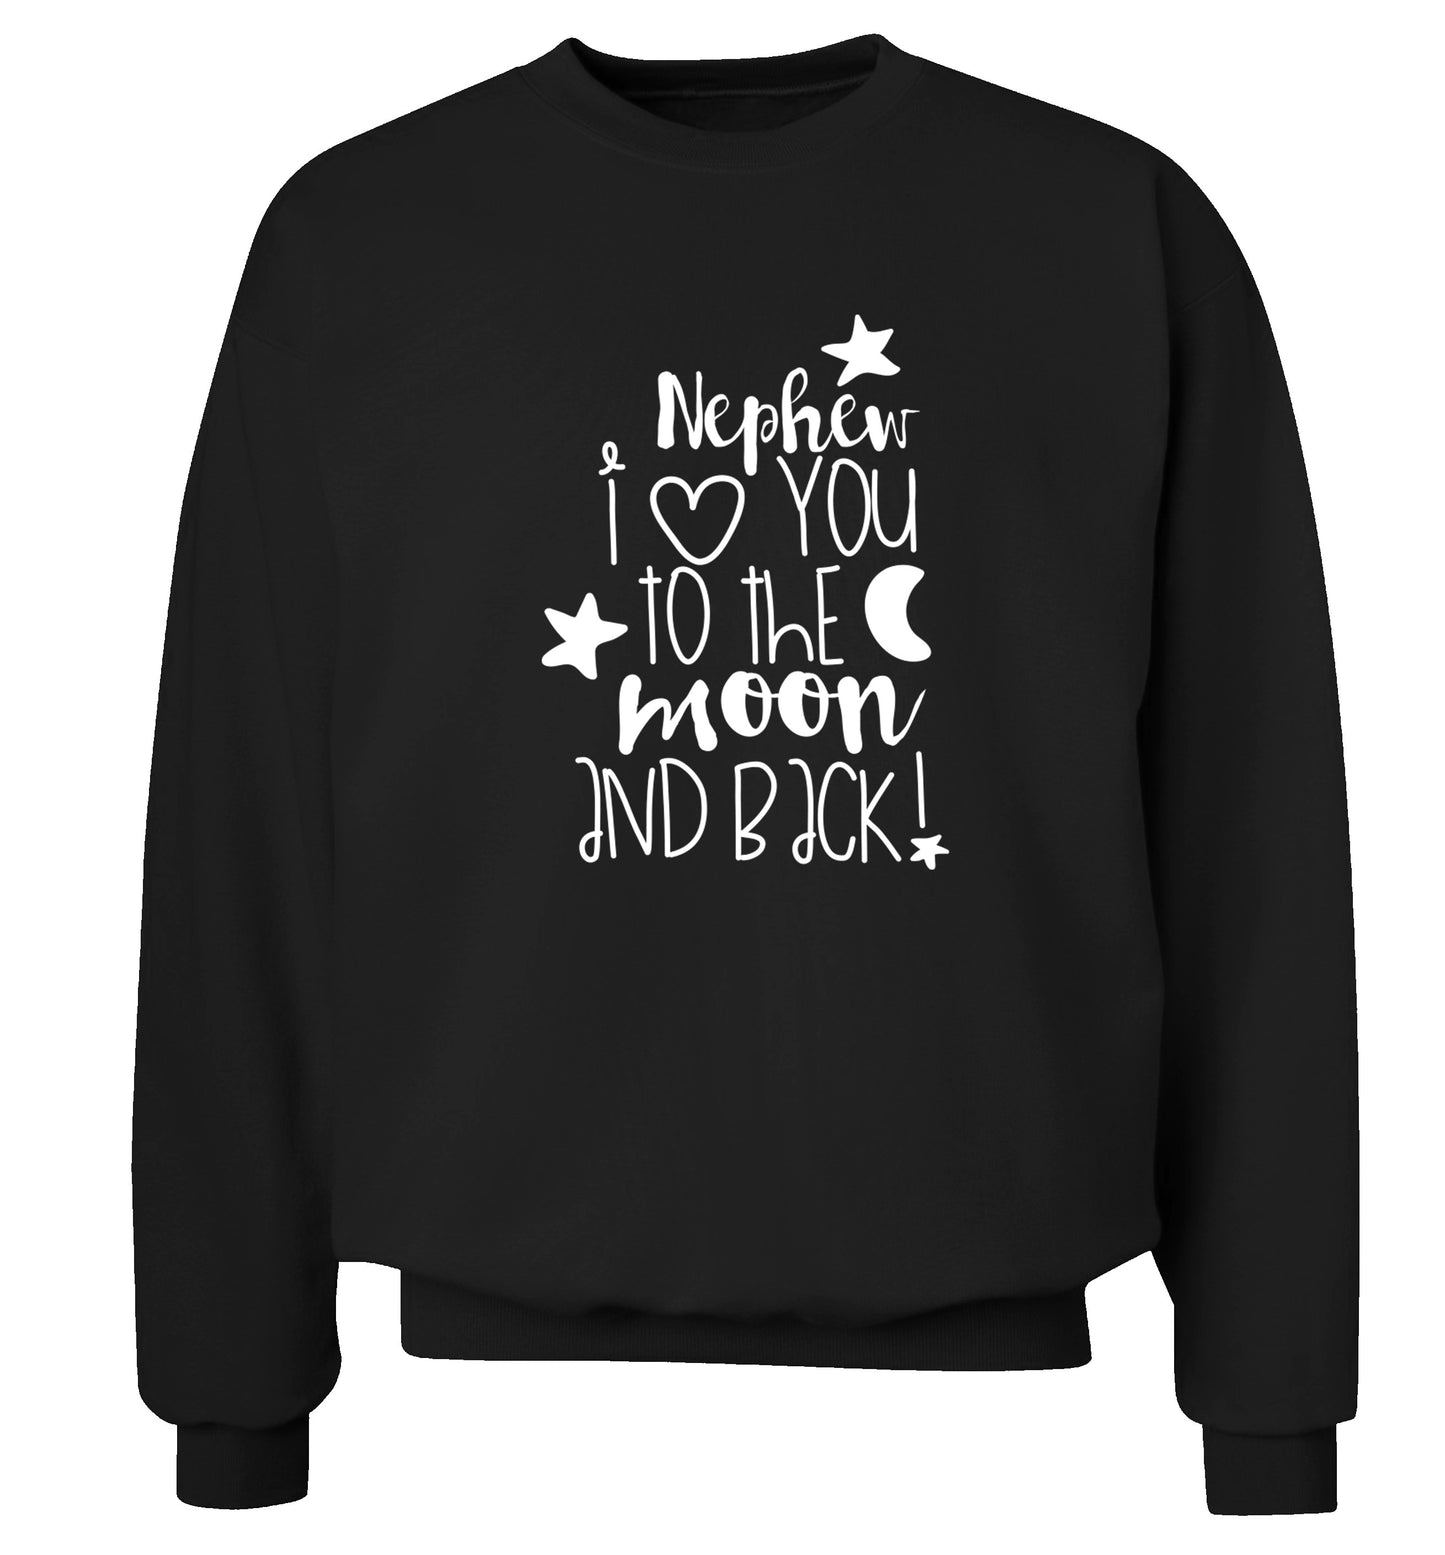 Nephew I love you to the moon and back Adult's unisex black  sweater 2XL